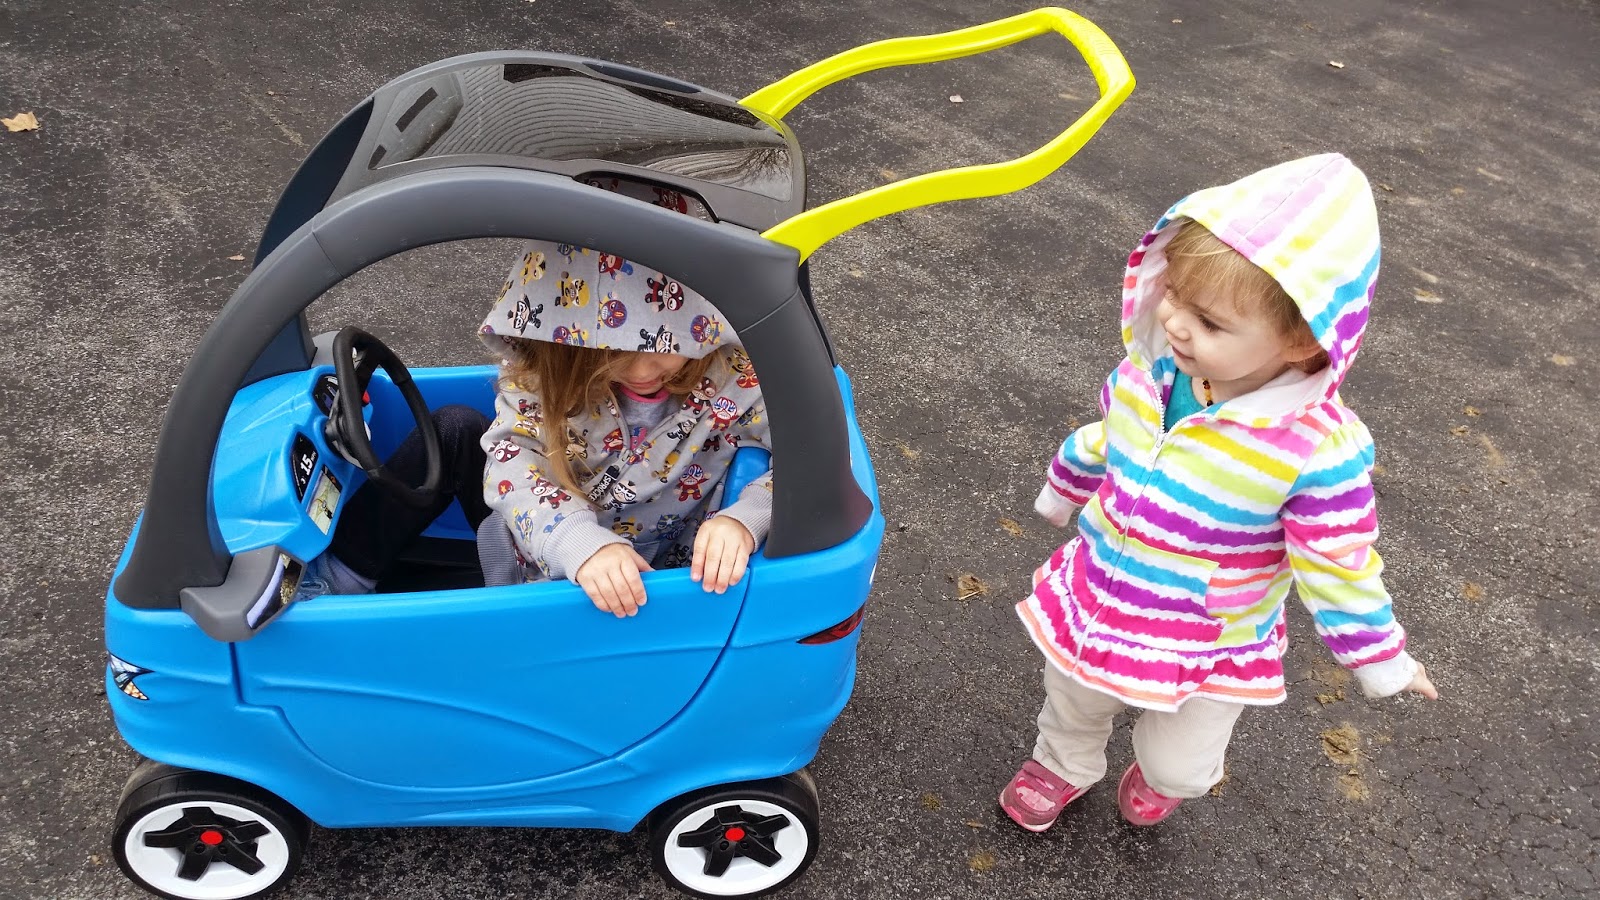 Little Tikes Cozy Coupe Sport Review | Mama's Geeky1600 x 900